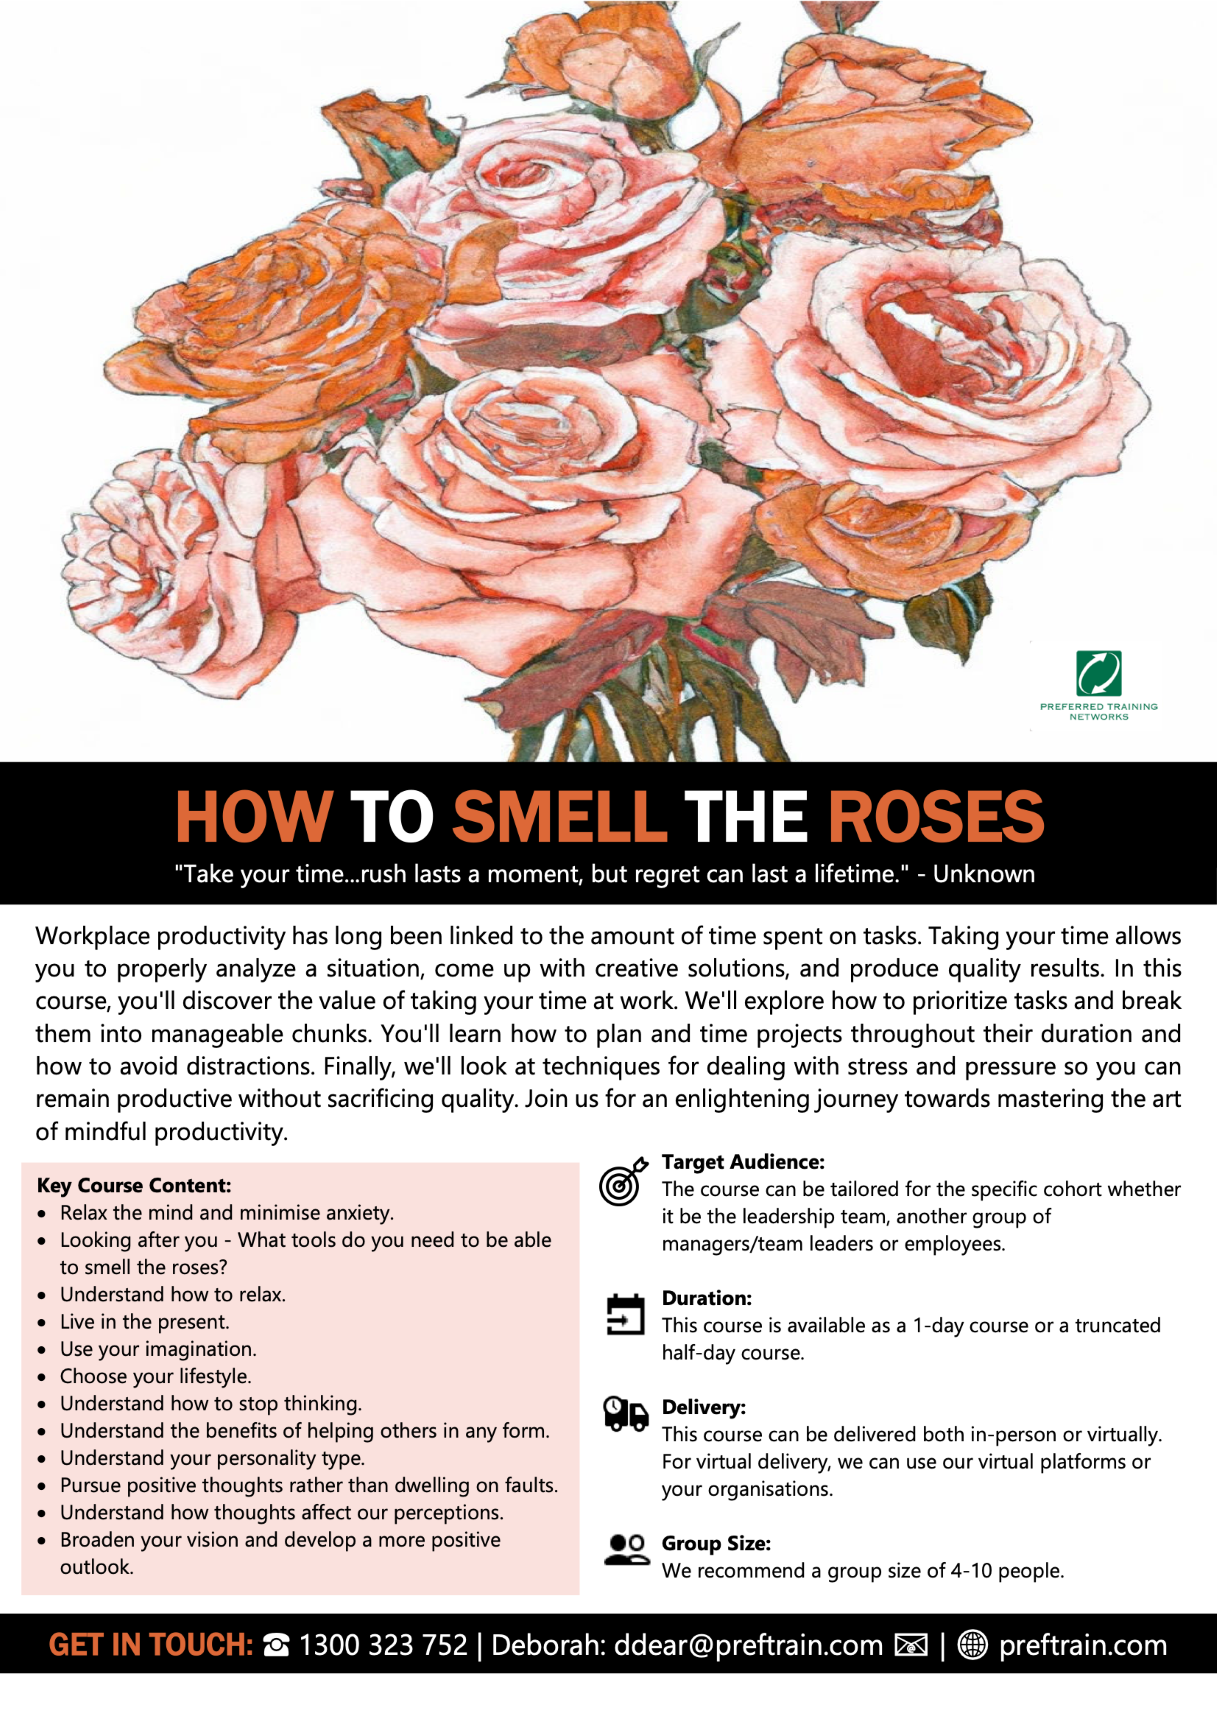 How To Smell The Roses